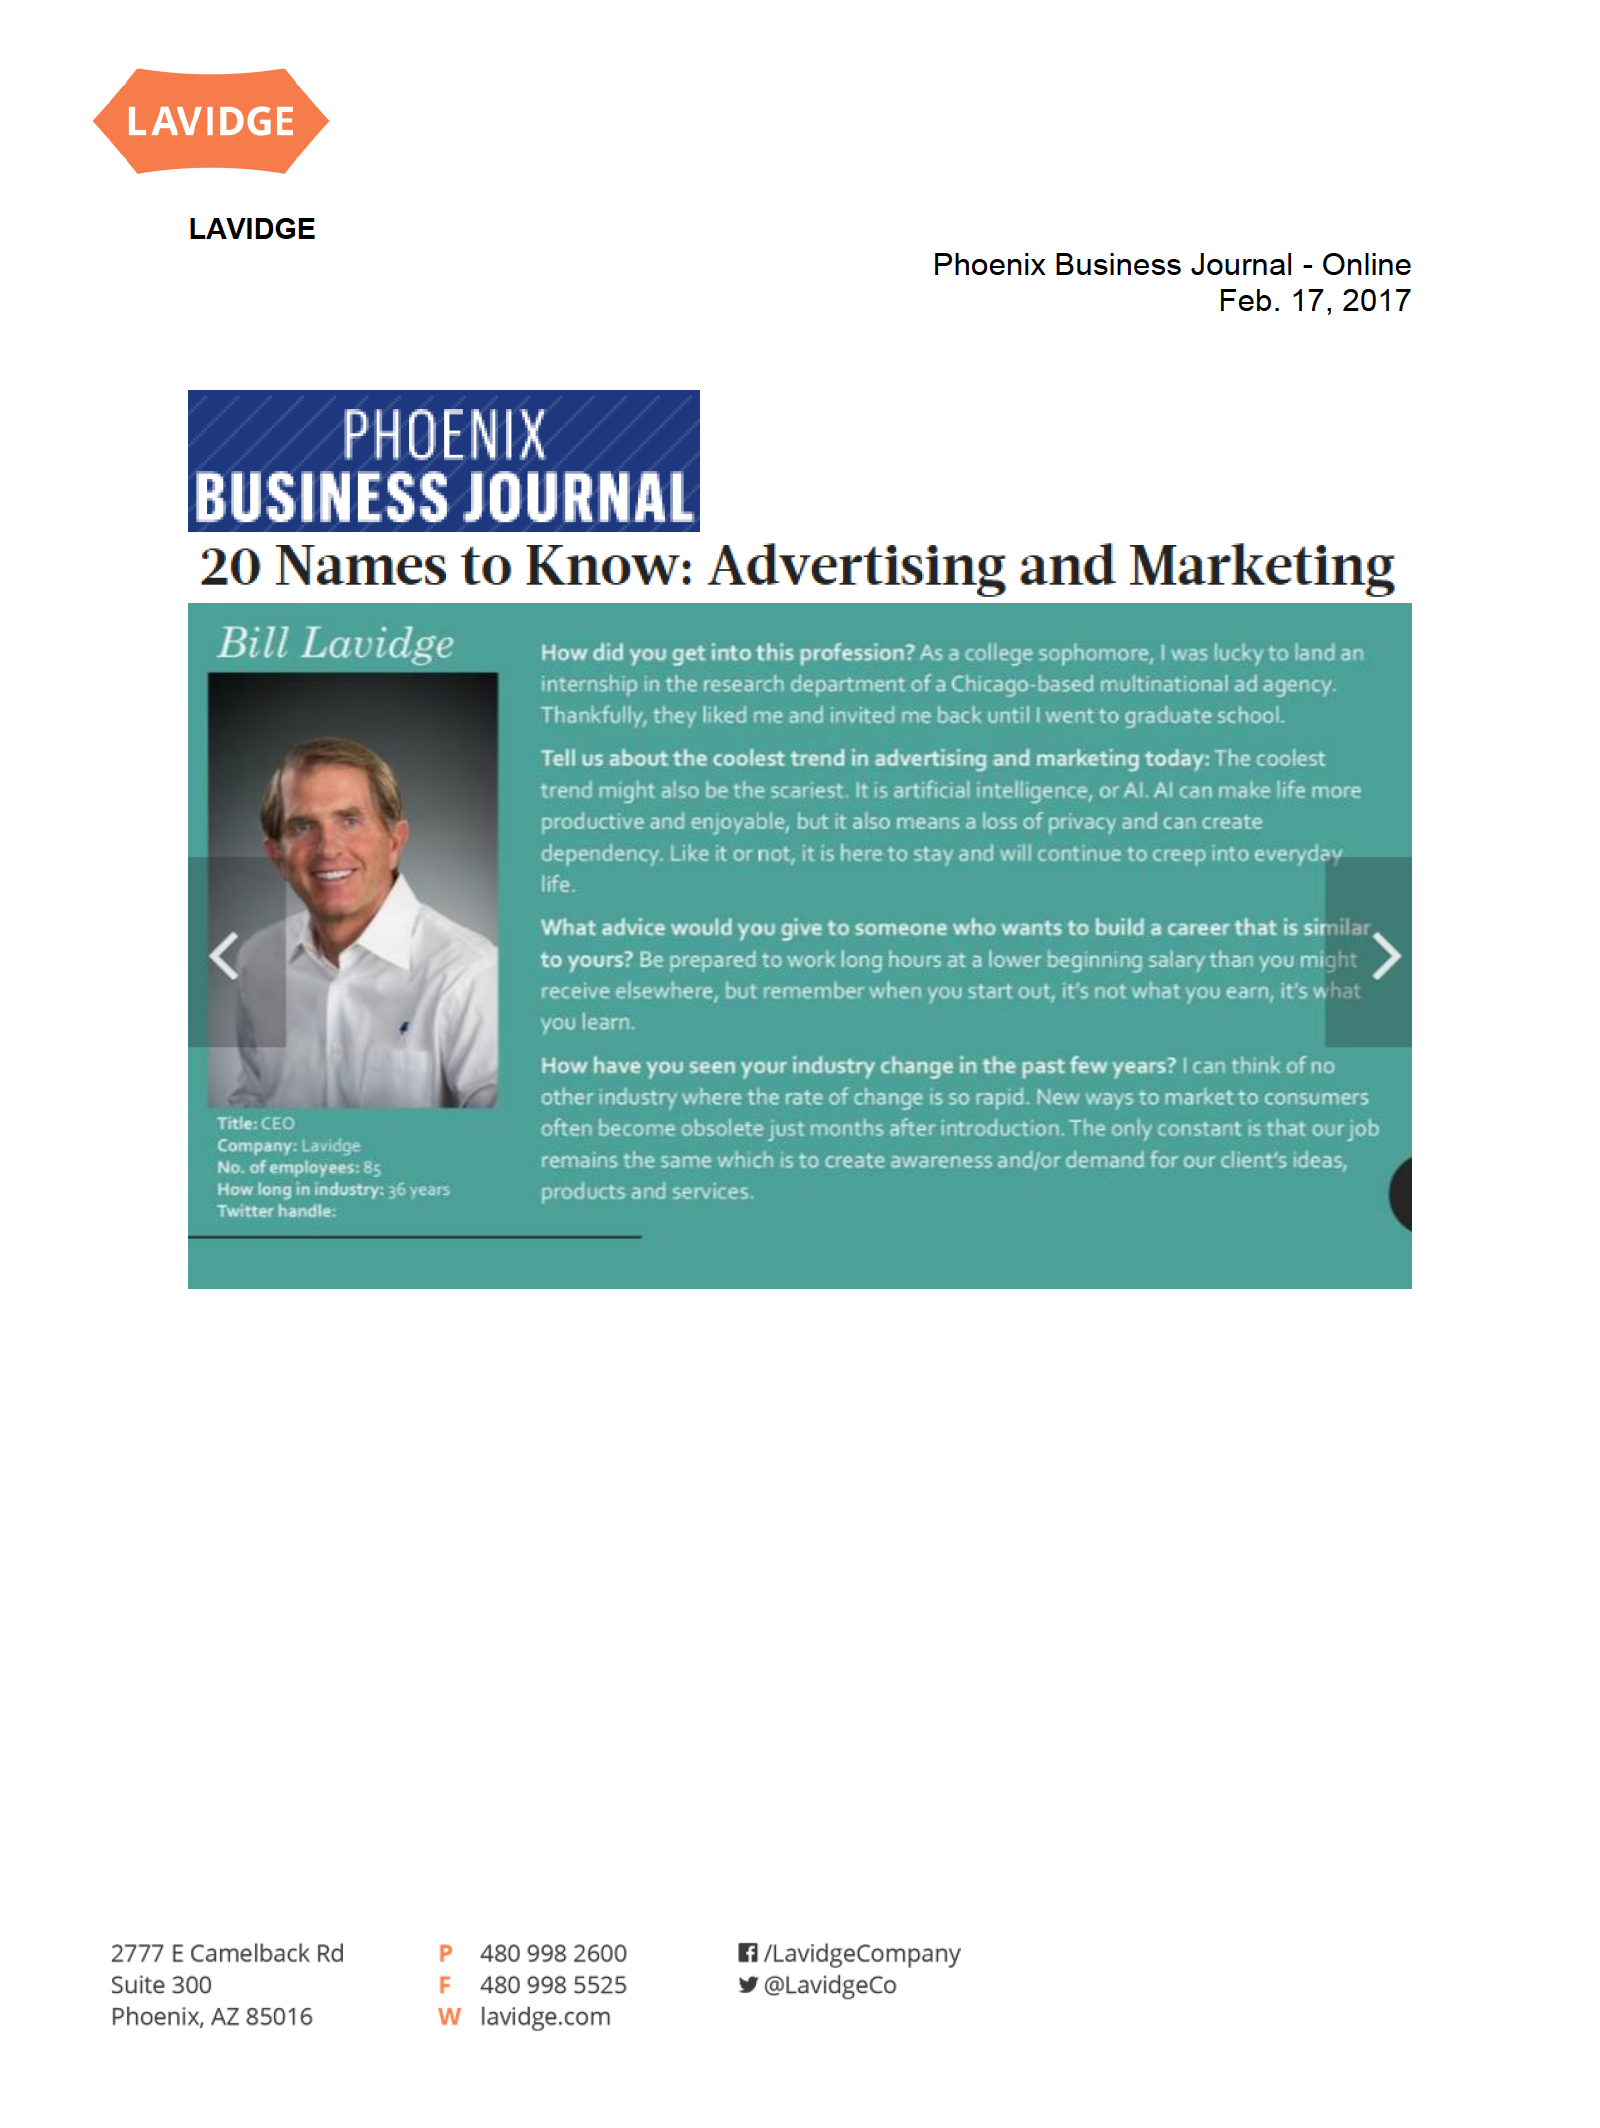 Phoenix Business Journal - 20 Names to Know: Marketing & Advertising